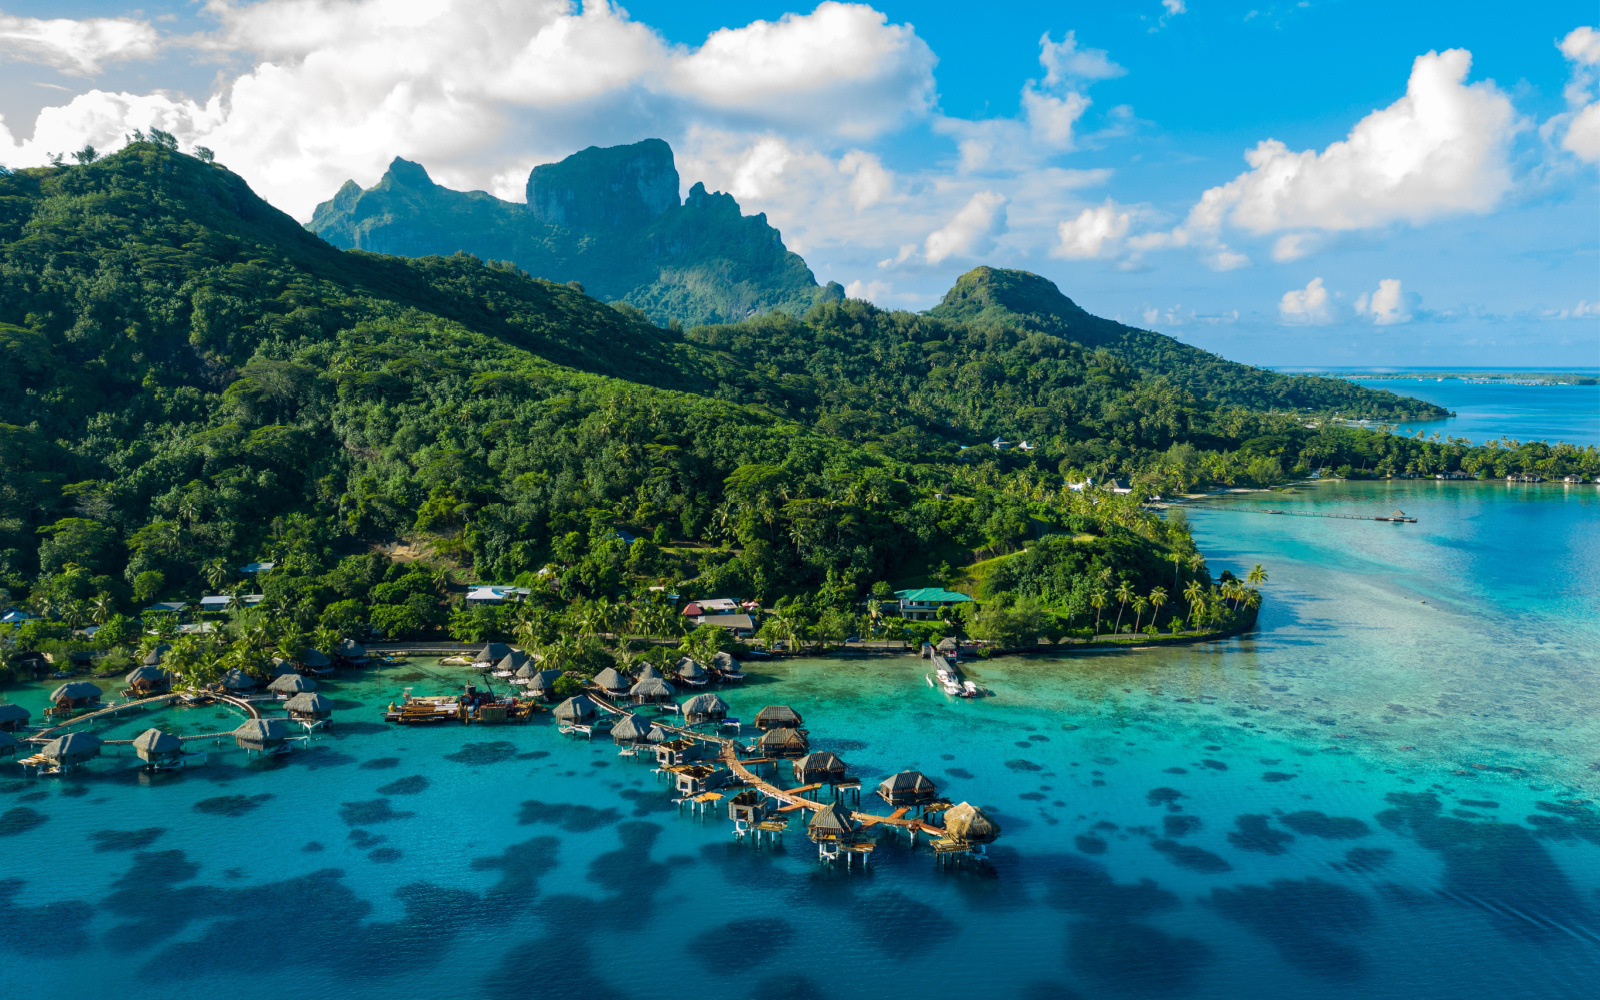 How Long Is a Flight to Bora Bora From the US?